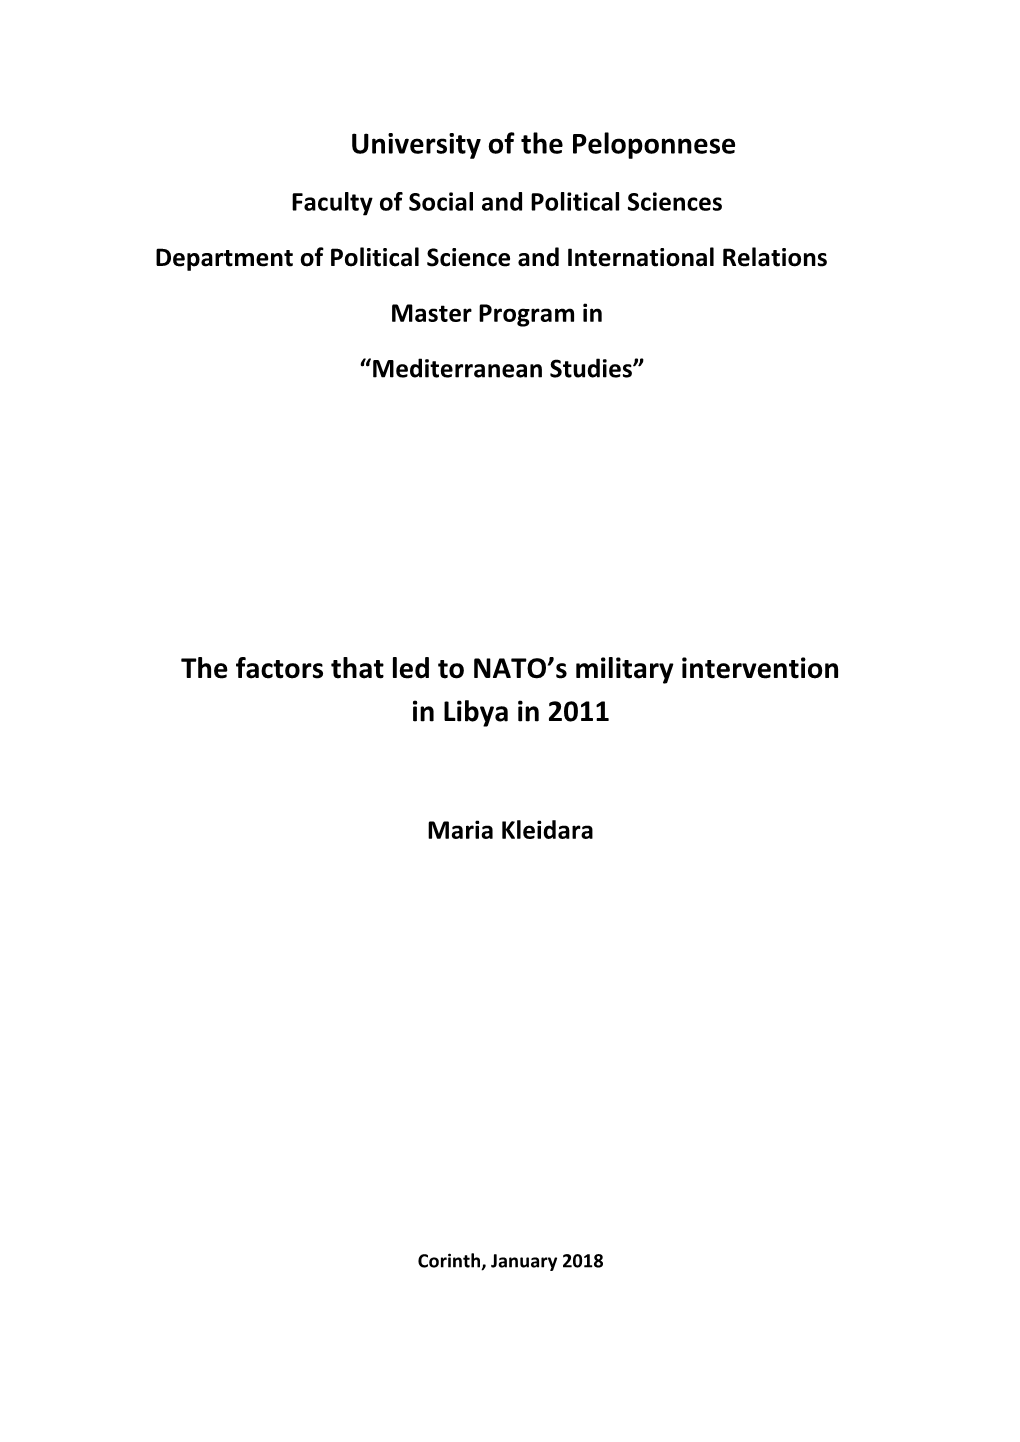 The Factors That Led to NATO's Military Intervention in Libya in 2011